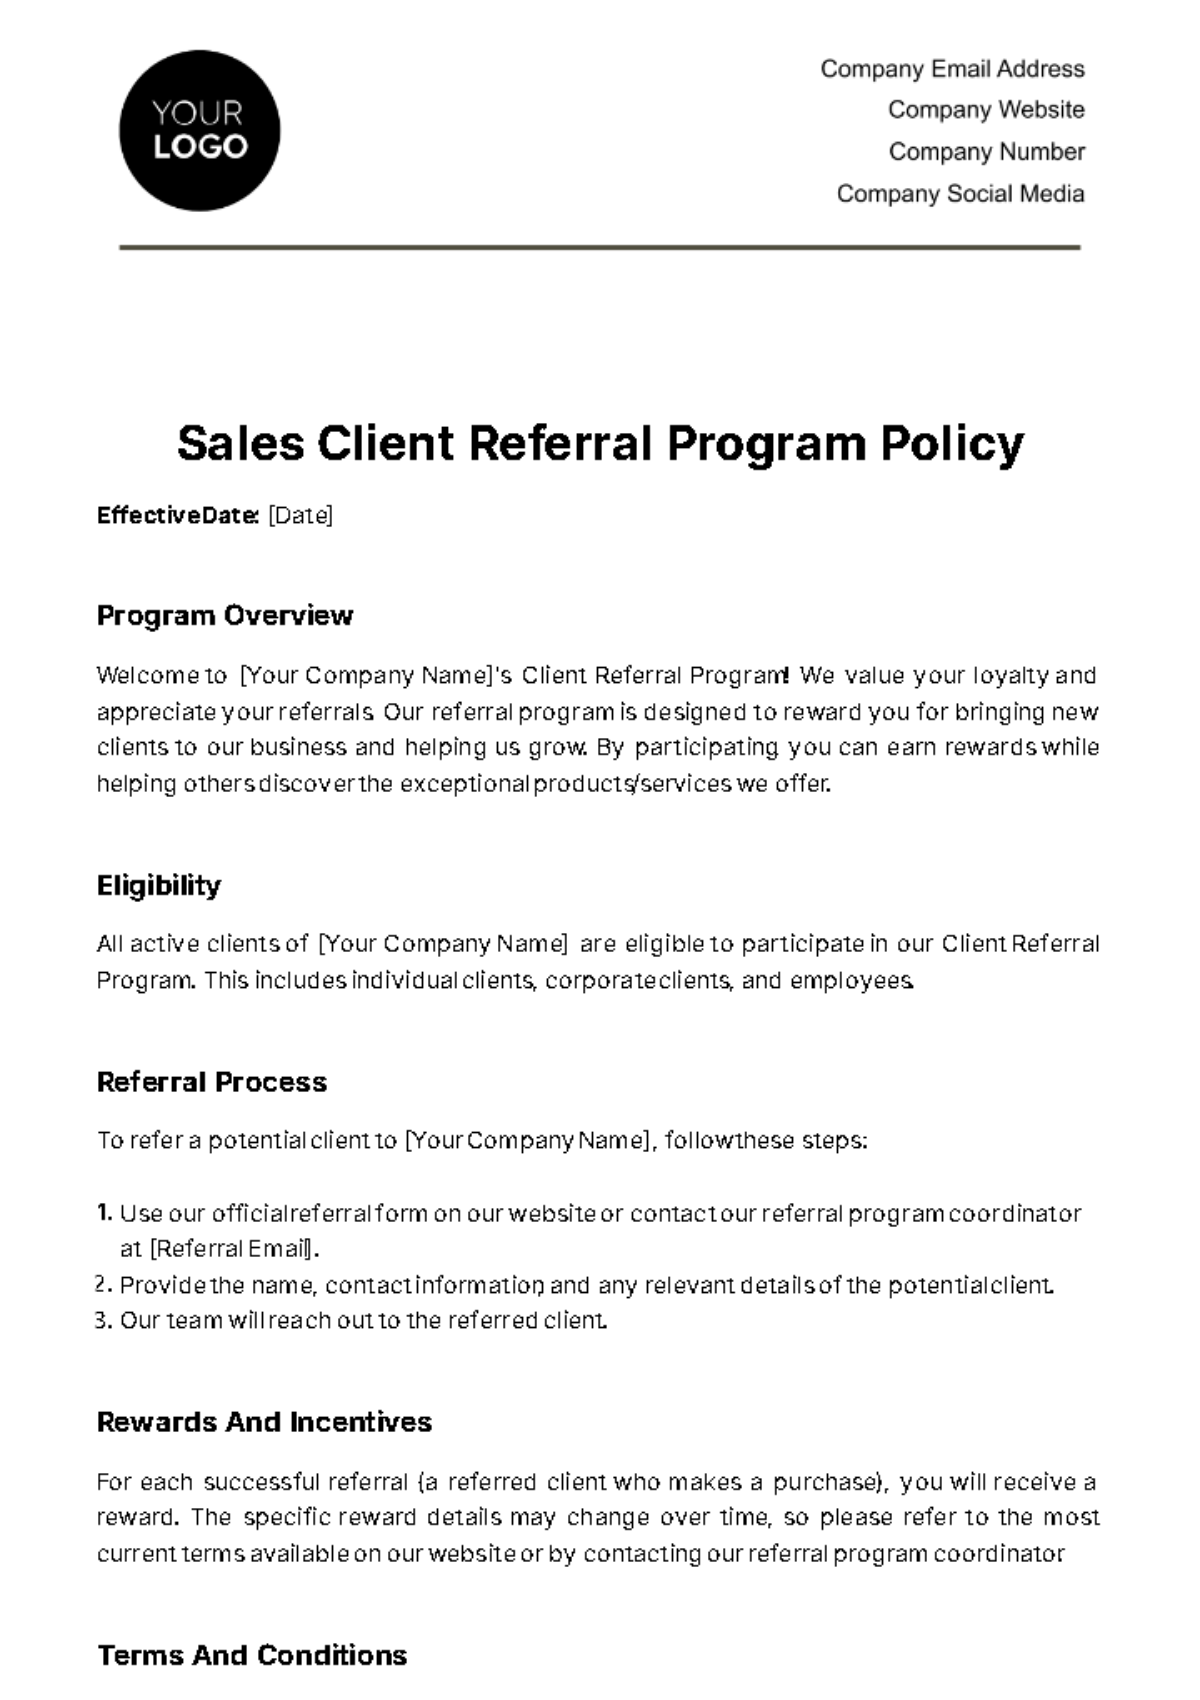 Free Sales Client Referral Program Policy Template